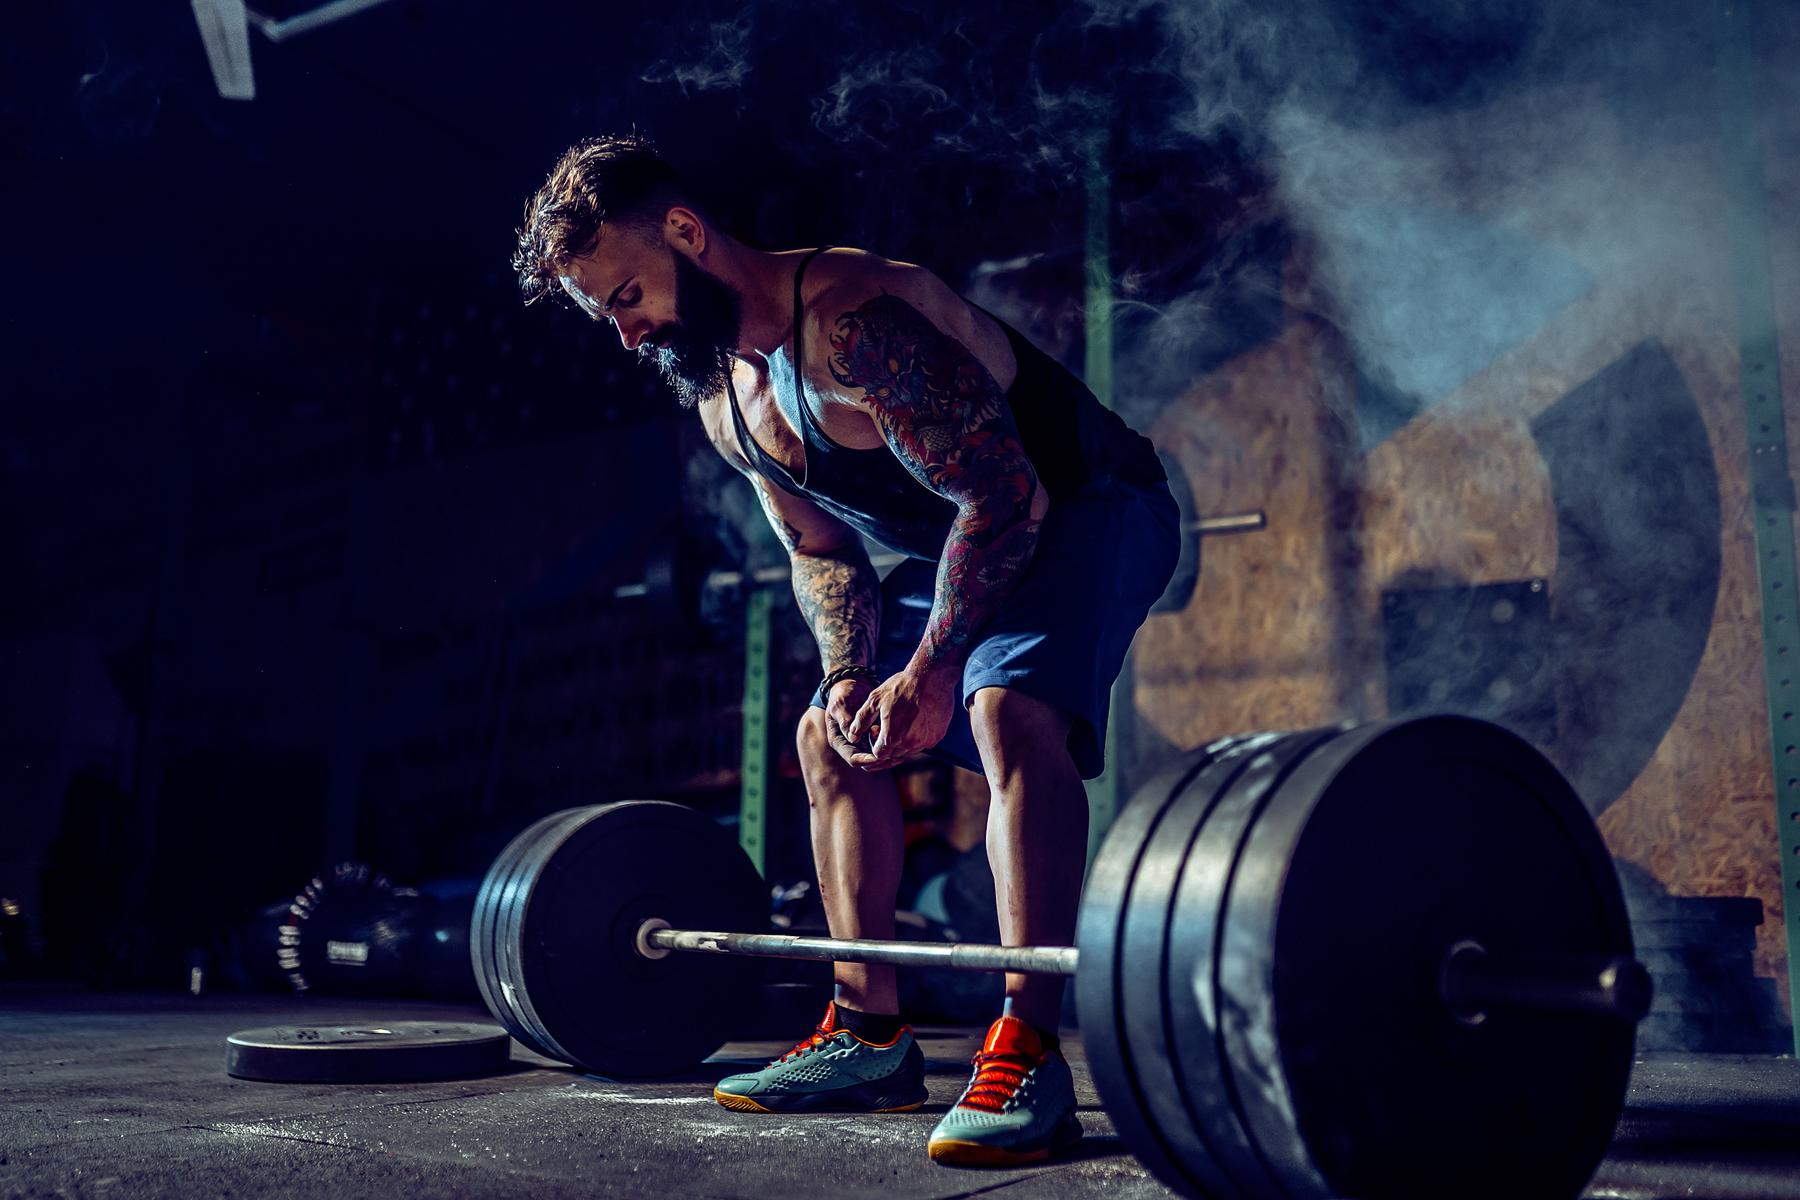 How to Master the Sumo Deadlift Exercise Form for Heavy Weights